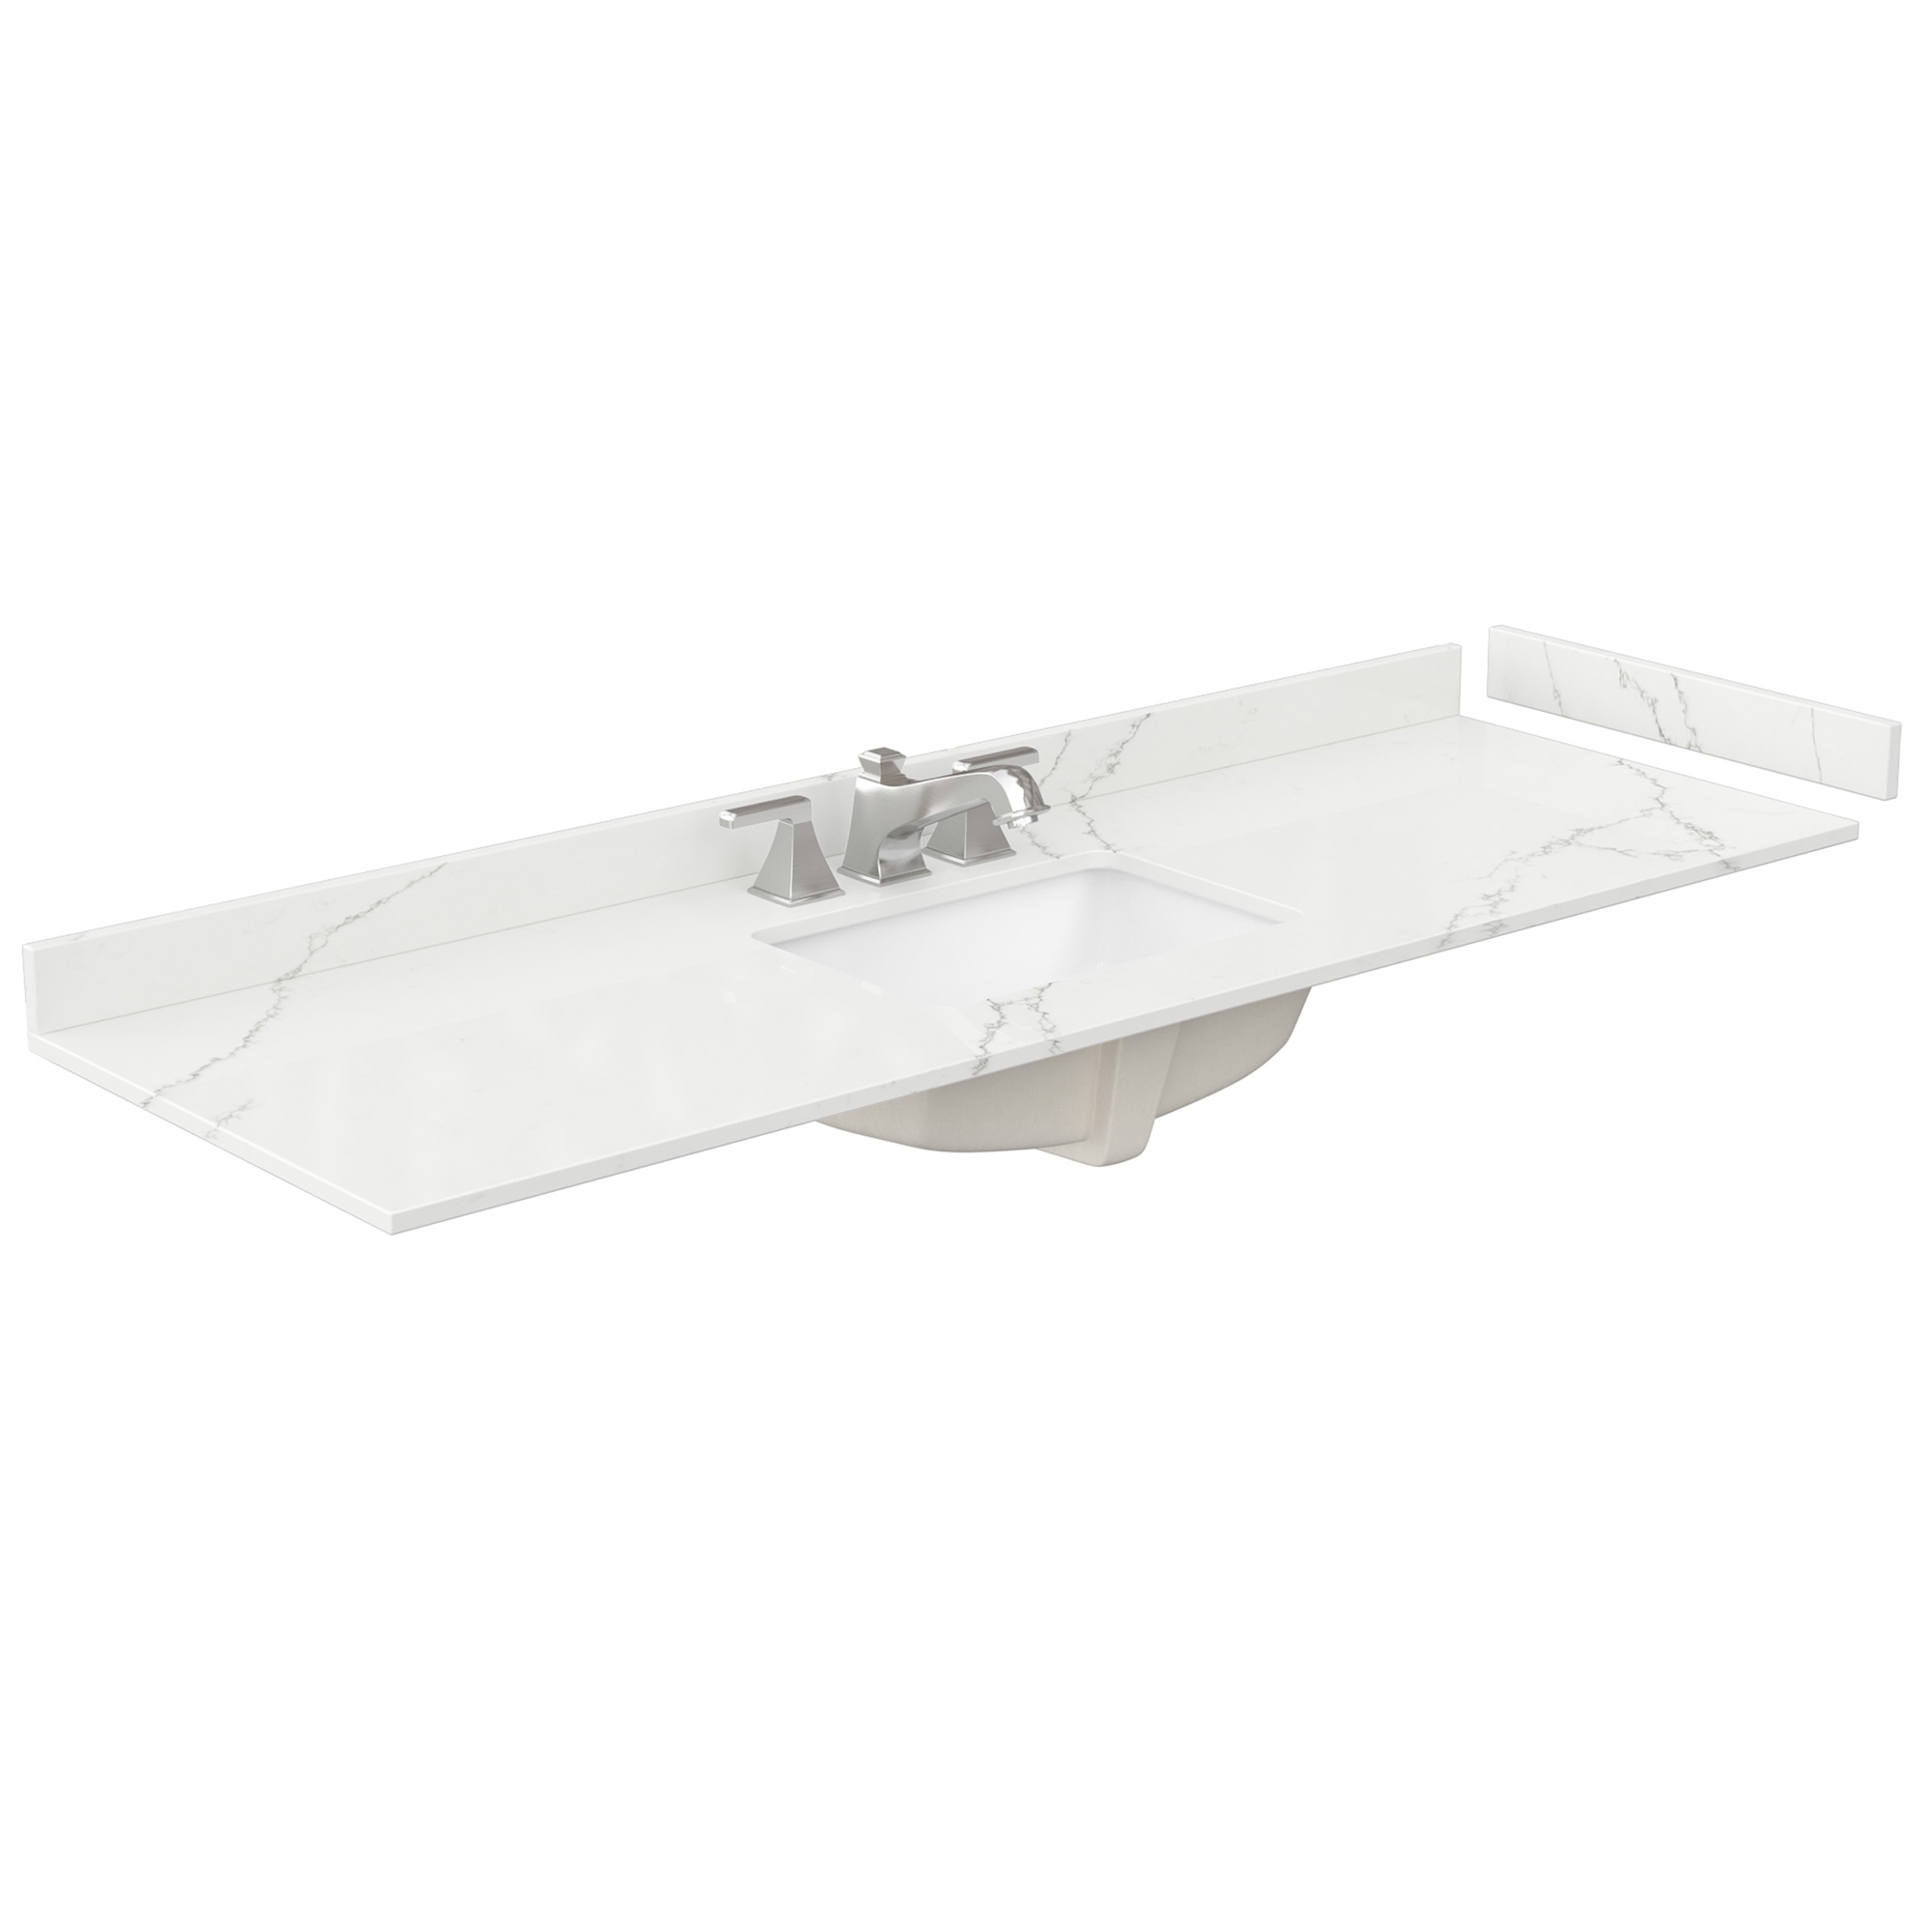 66" Single Countertop - Giotto Quartz (8066) with Undermount Square Sink (3-Hole) - Includes Backsplash and Sidesplash WCFQC366STOPUNSGT